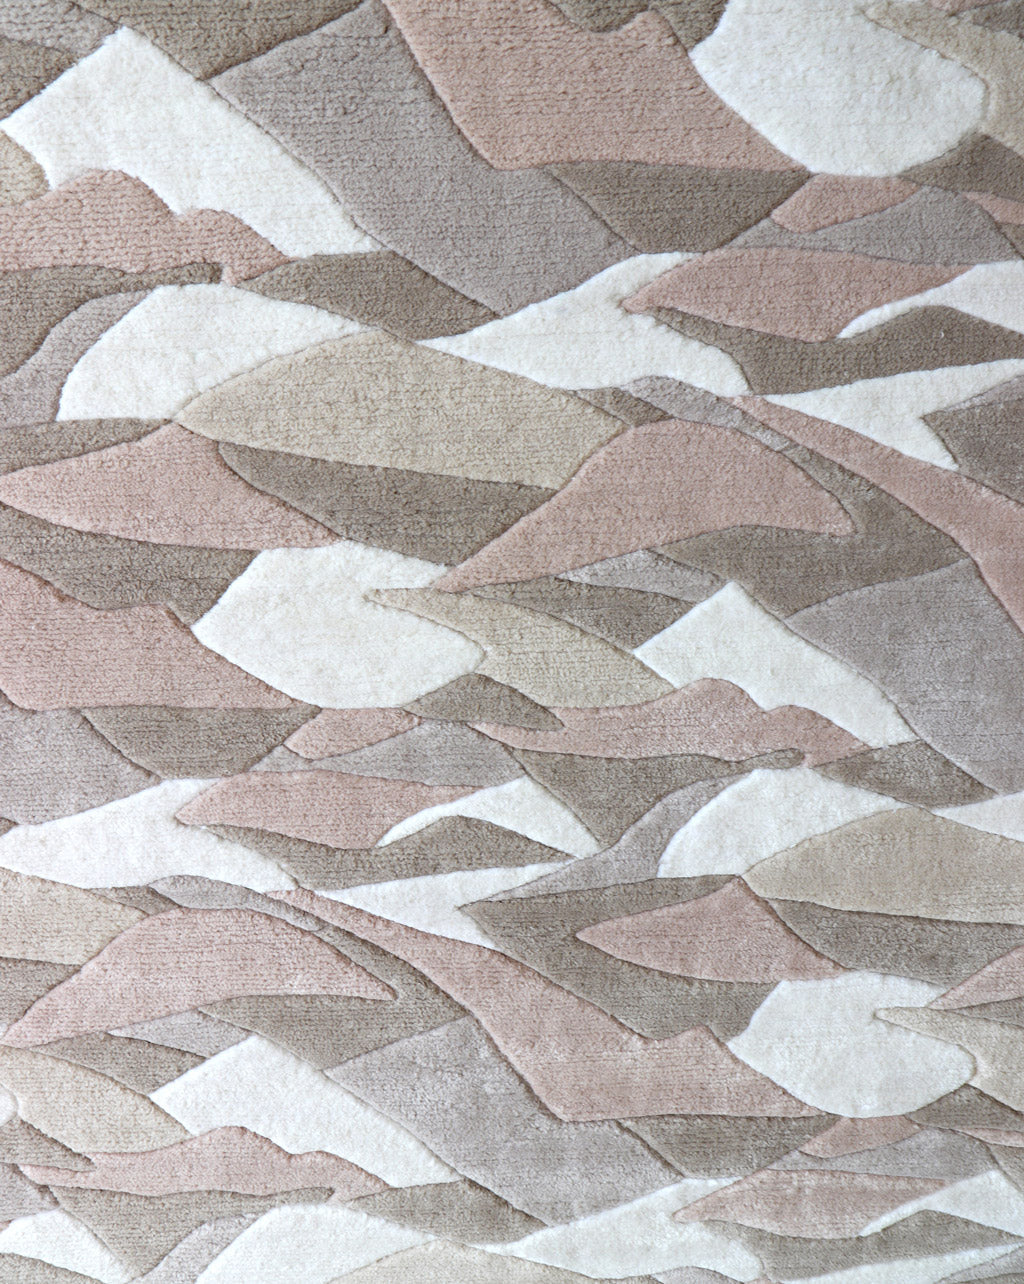 A Mani Hand Knotted Rug 5' x 8' with a pattern of mountains on it, made of merino wool.